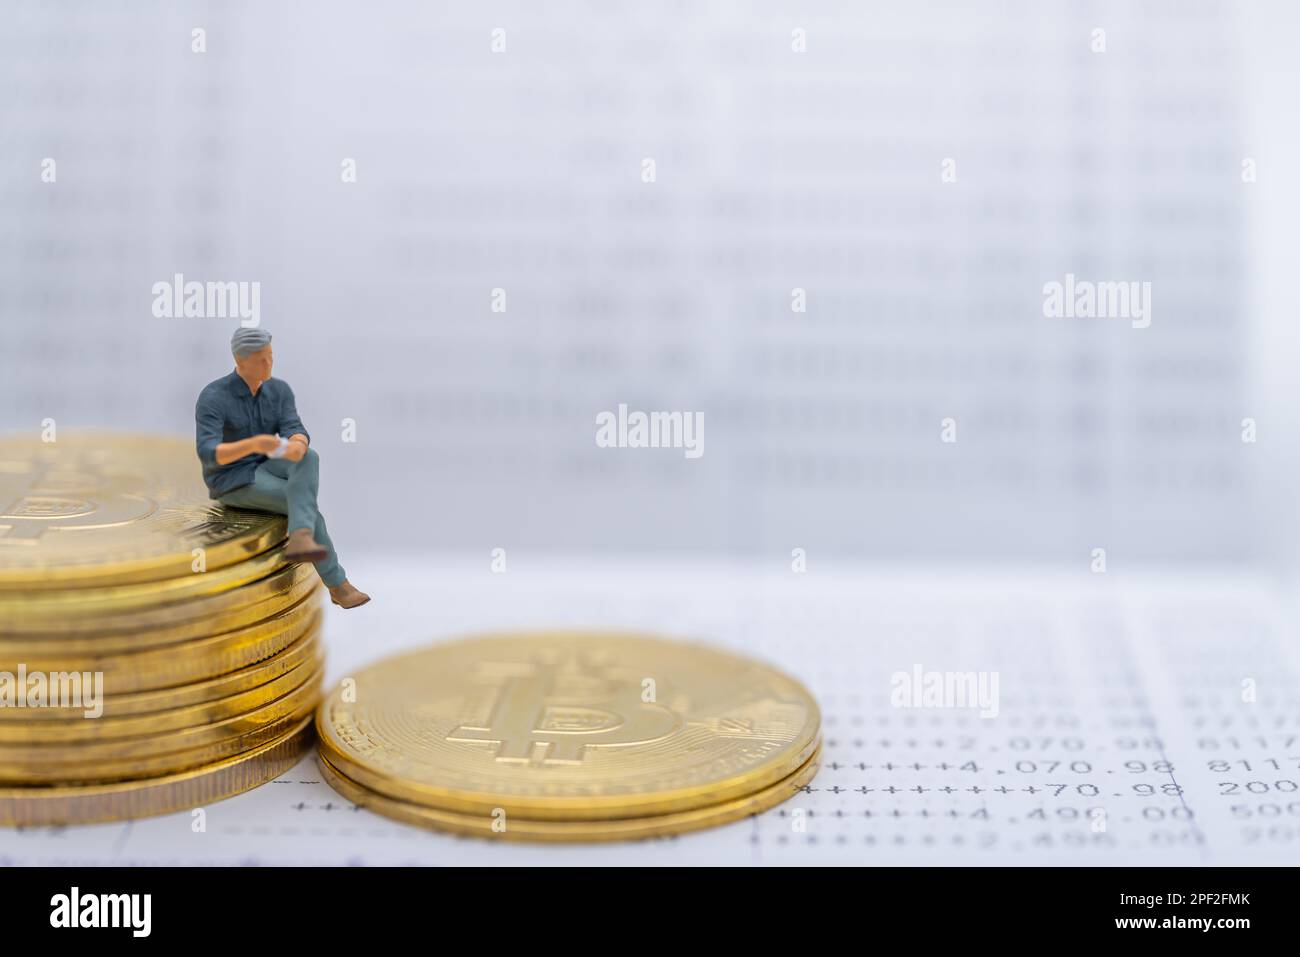 Business, Money, Cryptocurrency and Financial Concept. Businessman miniature figure sitting on stack of gold Bitcoin coins on bank passbook. Stock Photo